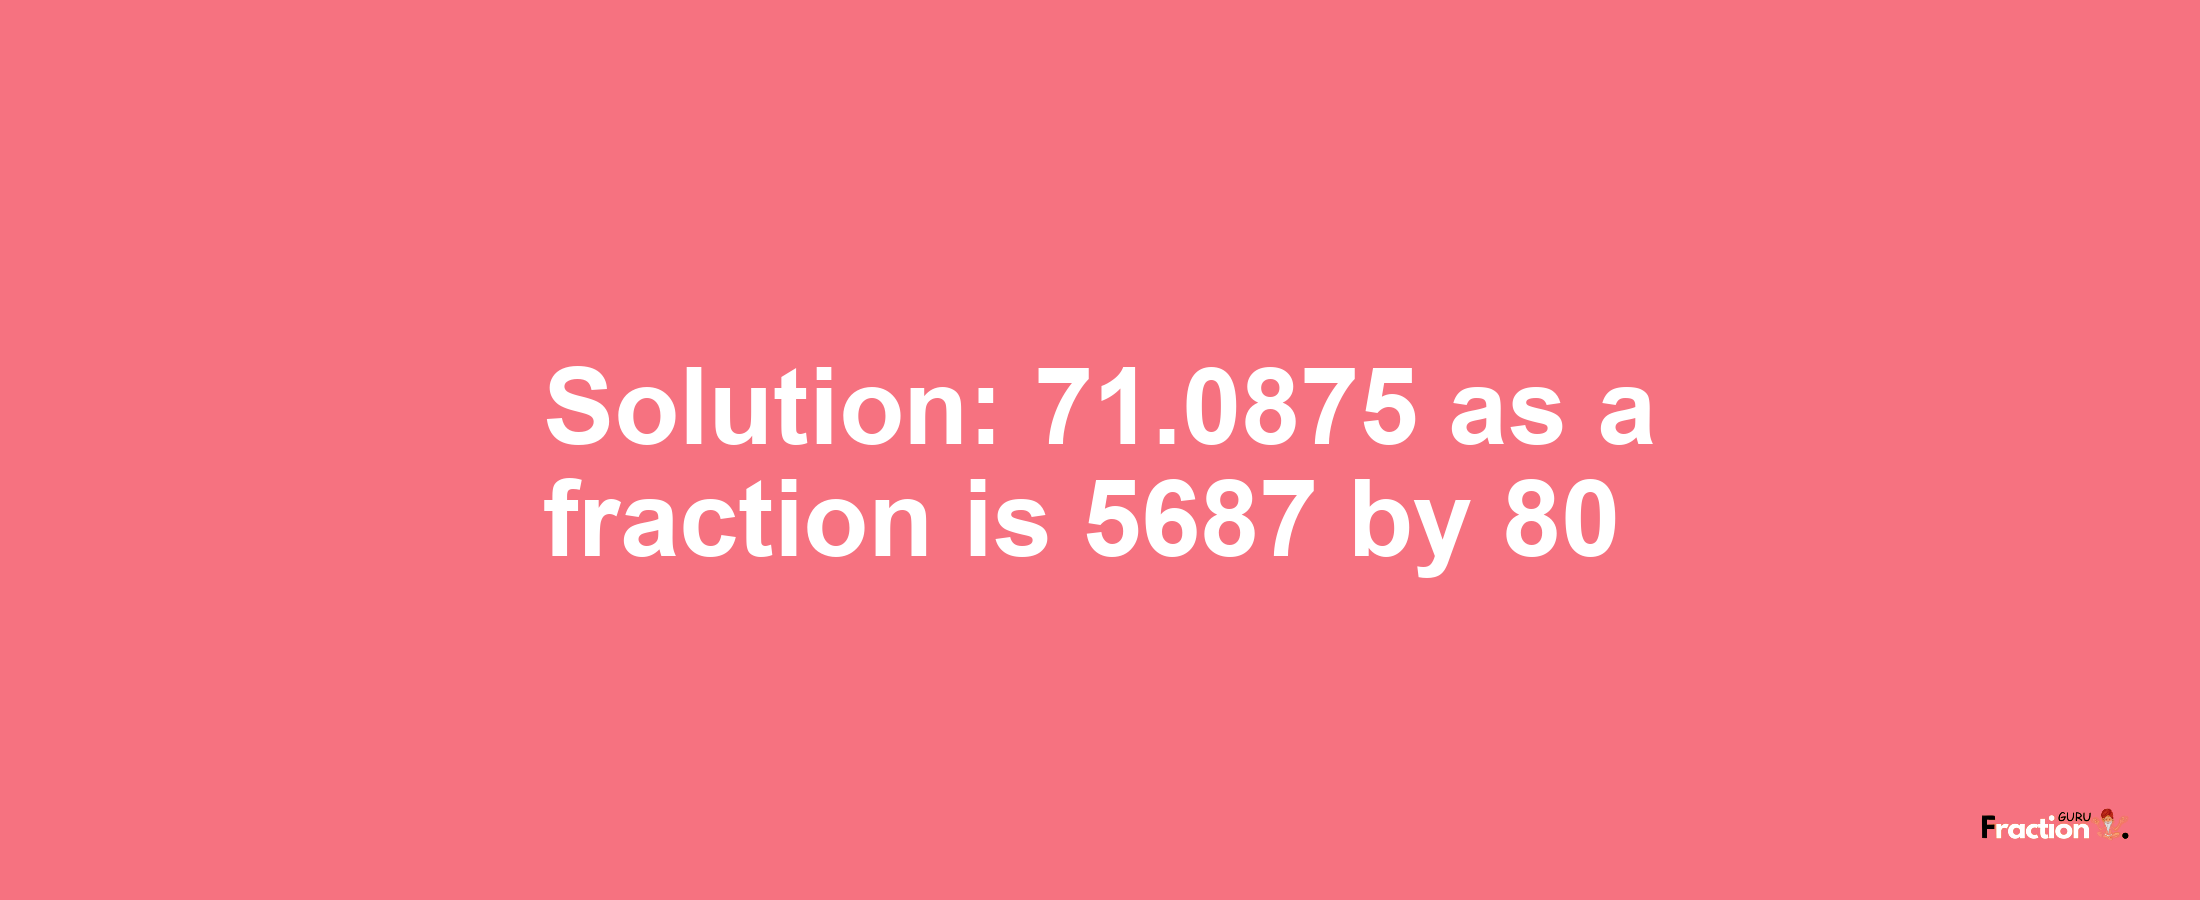 Solution:71.0875 as a fraction is 5687/80